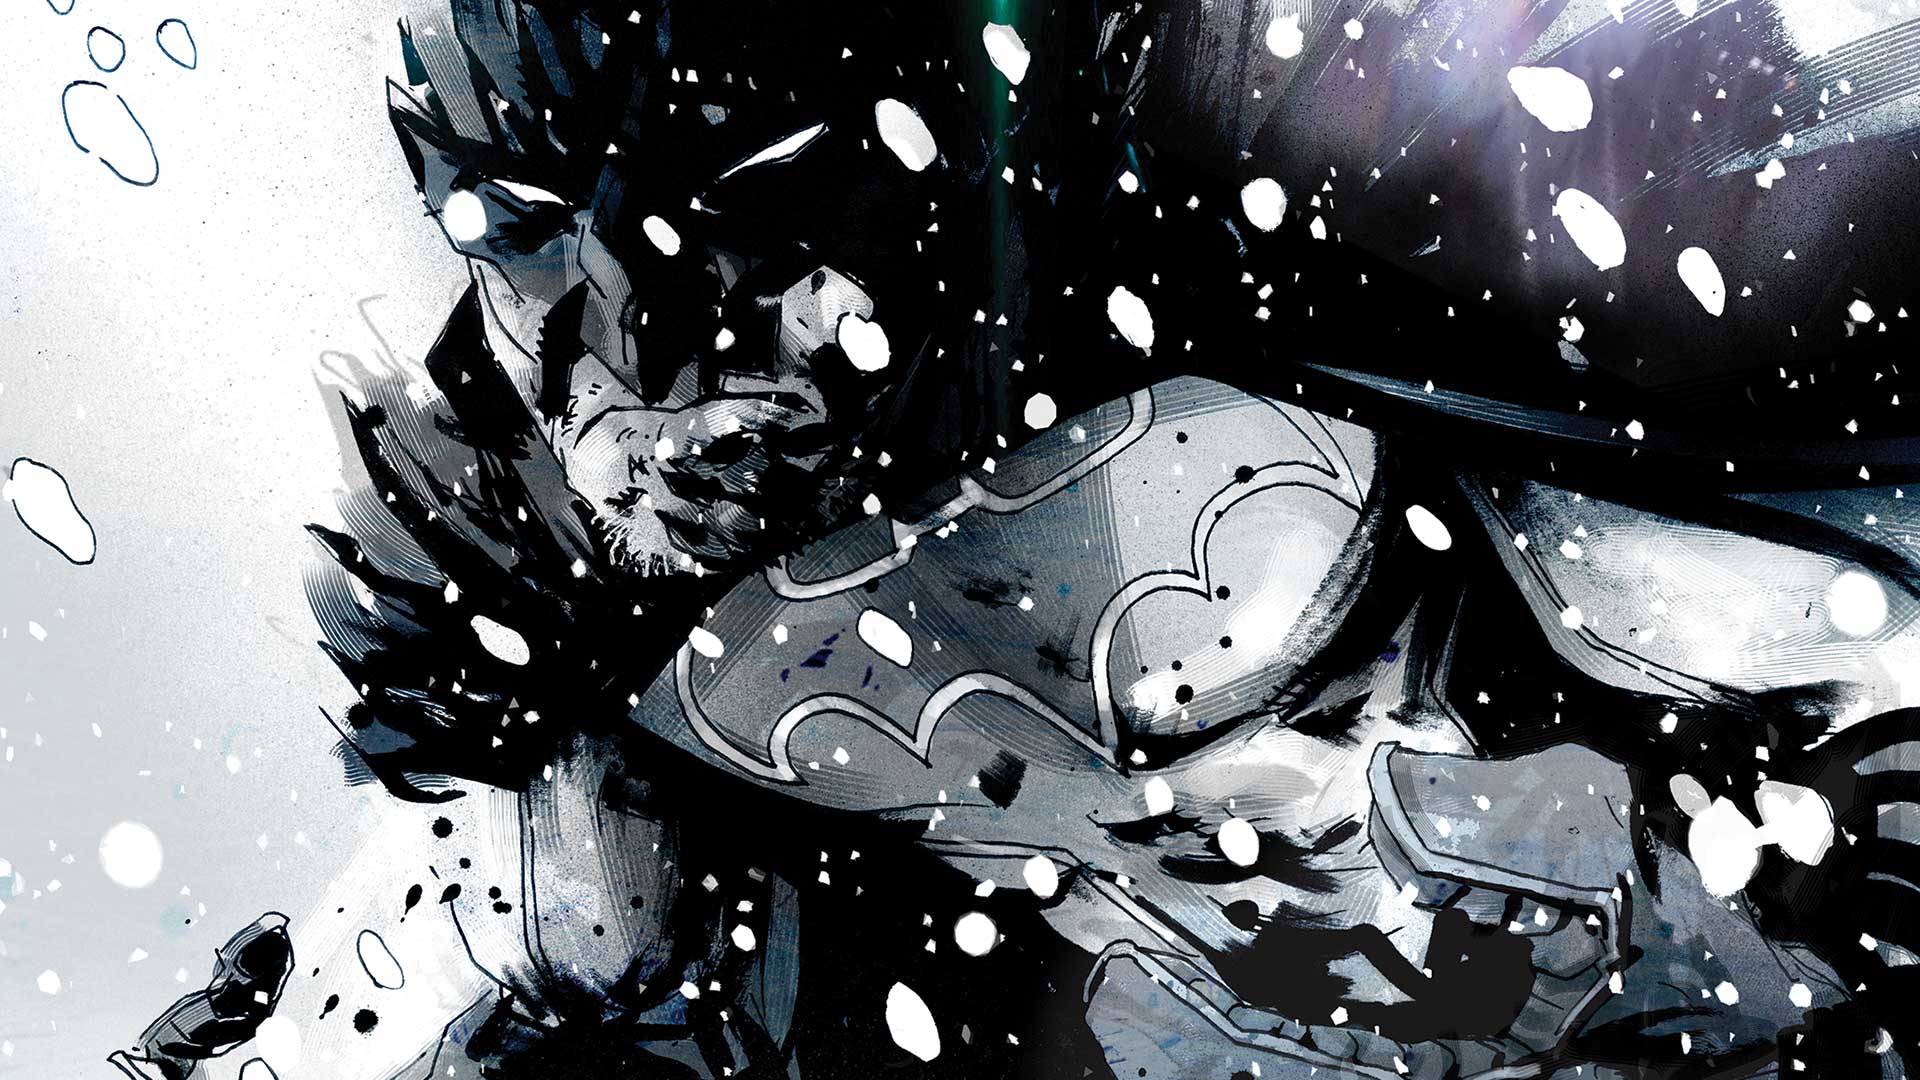 Northern Knight: Scott Snyder on Mr. Freeze, Creative Reunions and All Star Batman